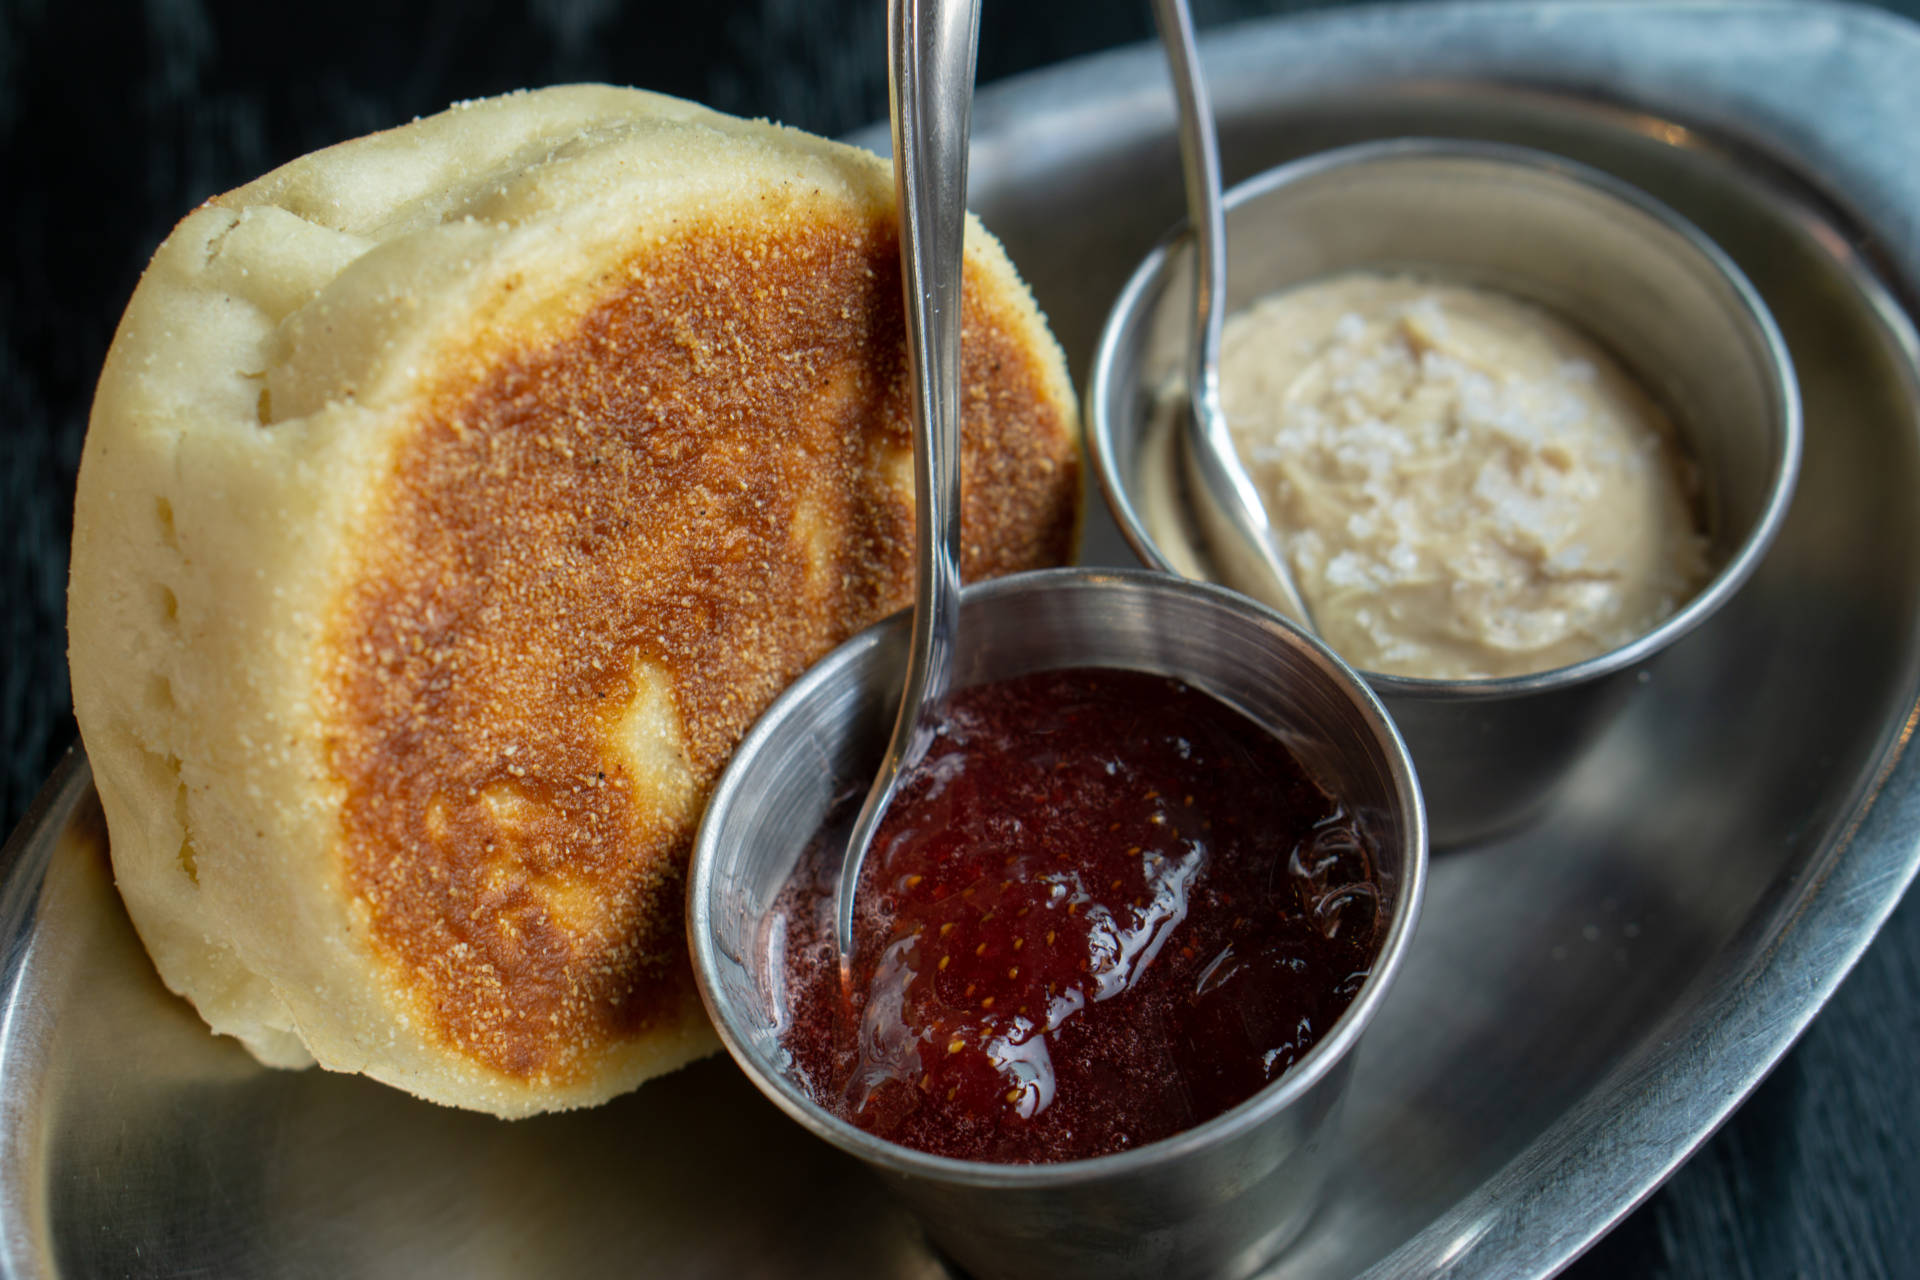 House made English muffins with jam and foie gras butter.